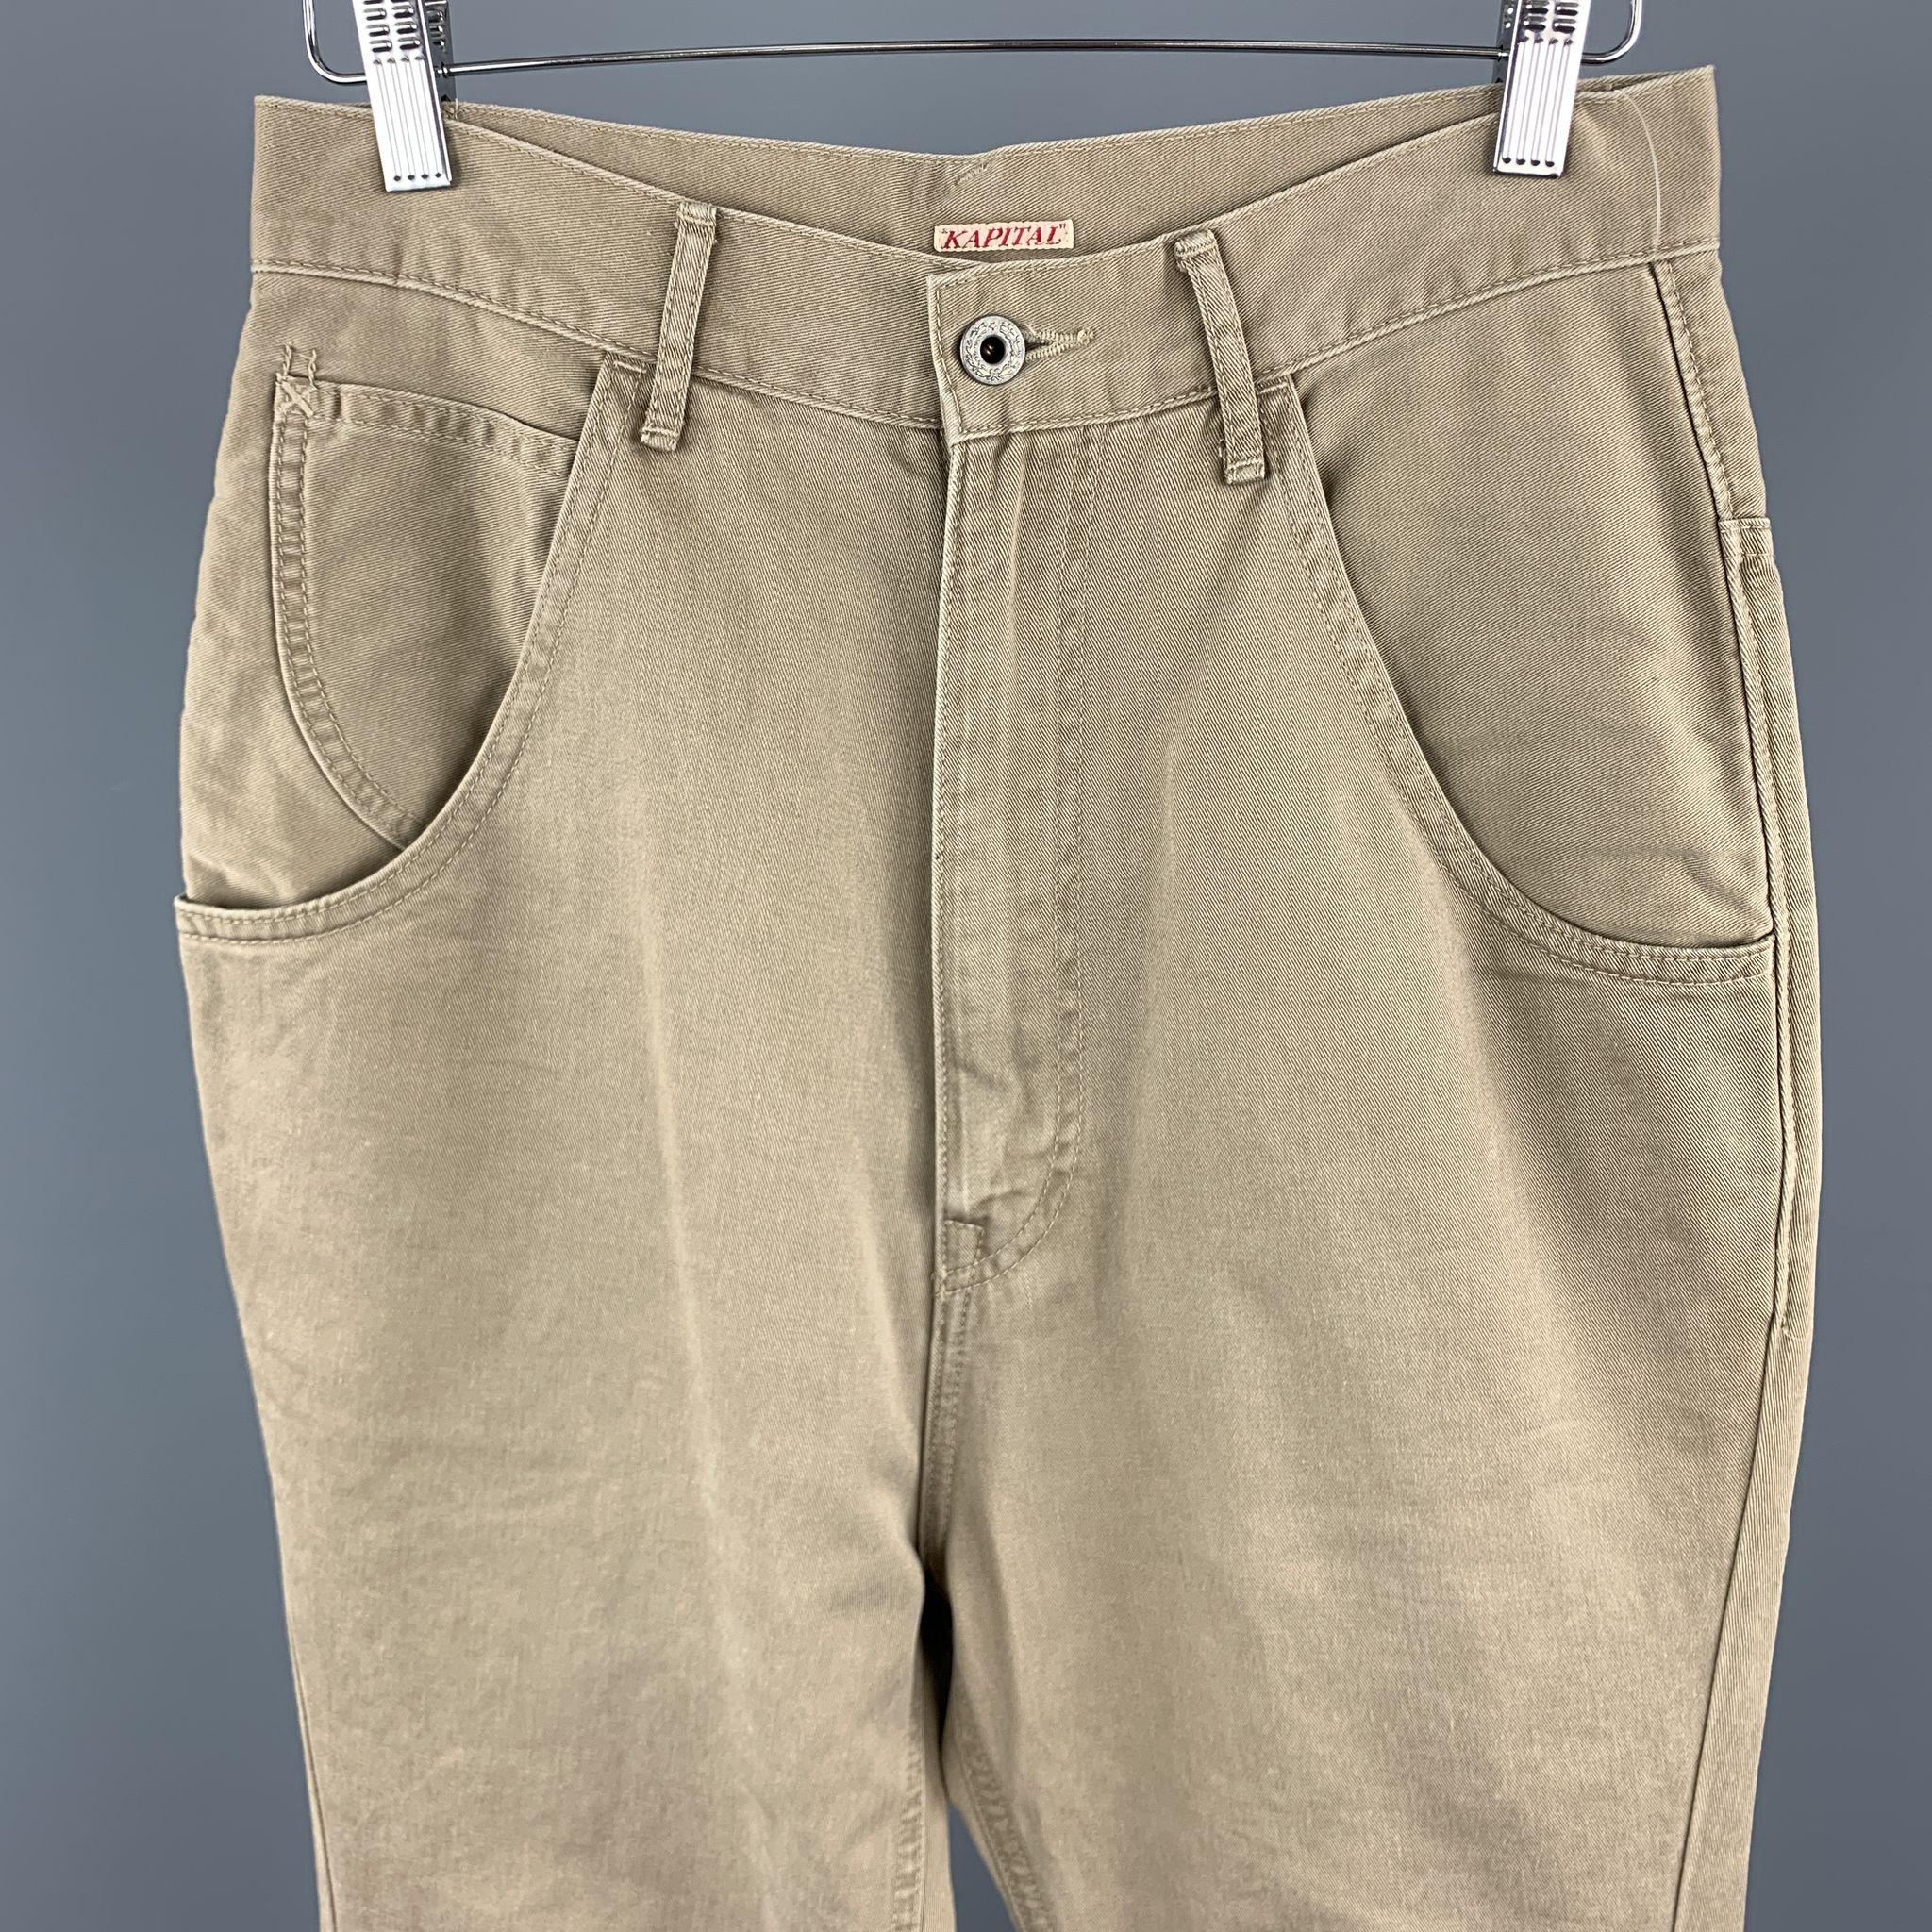 KAPITAL Casual Pants comes in a tan cotton featuring a back belt detail and a button up closure. Made in Japan.

Excellent Pre-Owned Condition.
Marked: (No Size Marked)

Measurements:

Waist: 30 in. 
Rise: 13 in. 
Inseam: 30 in. 

SKU: